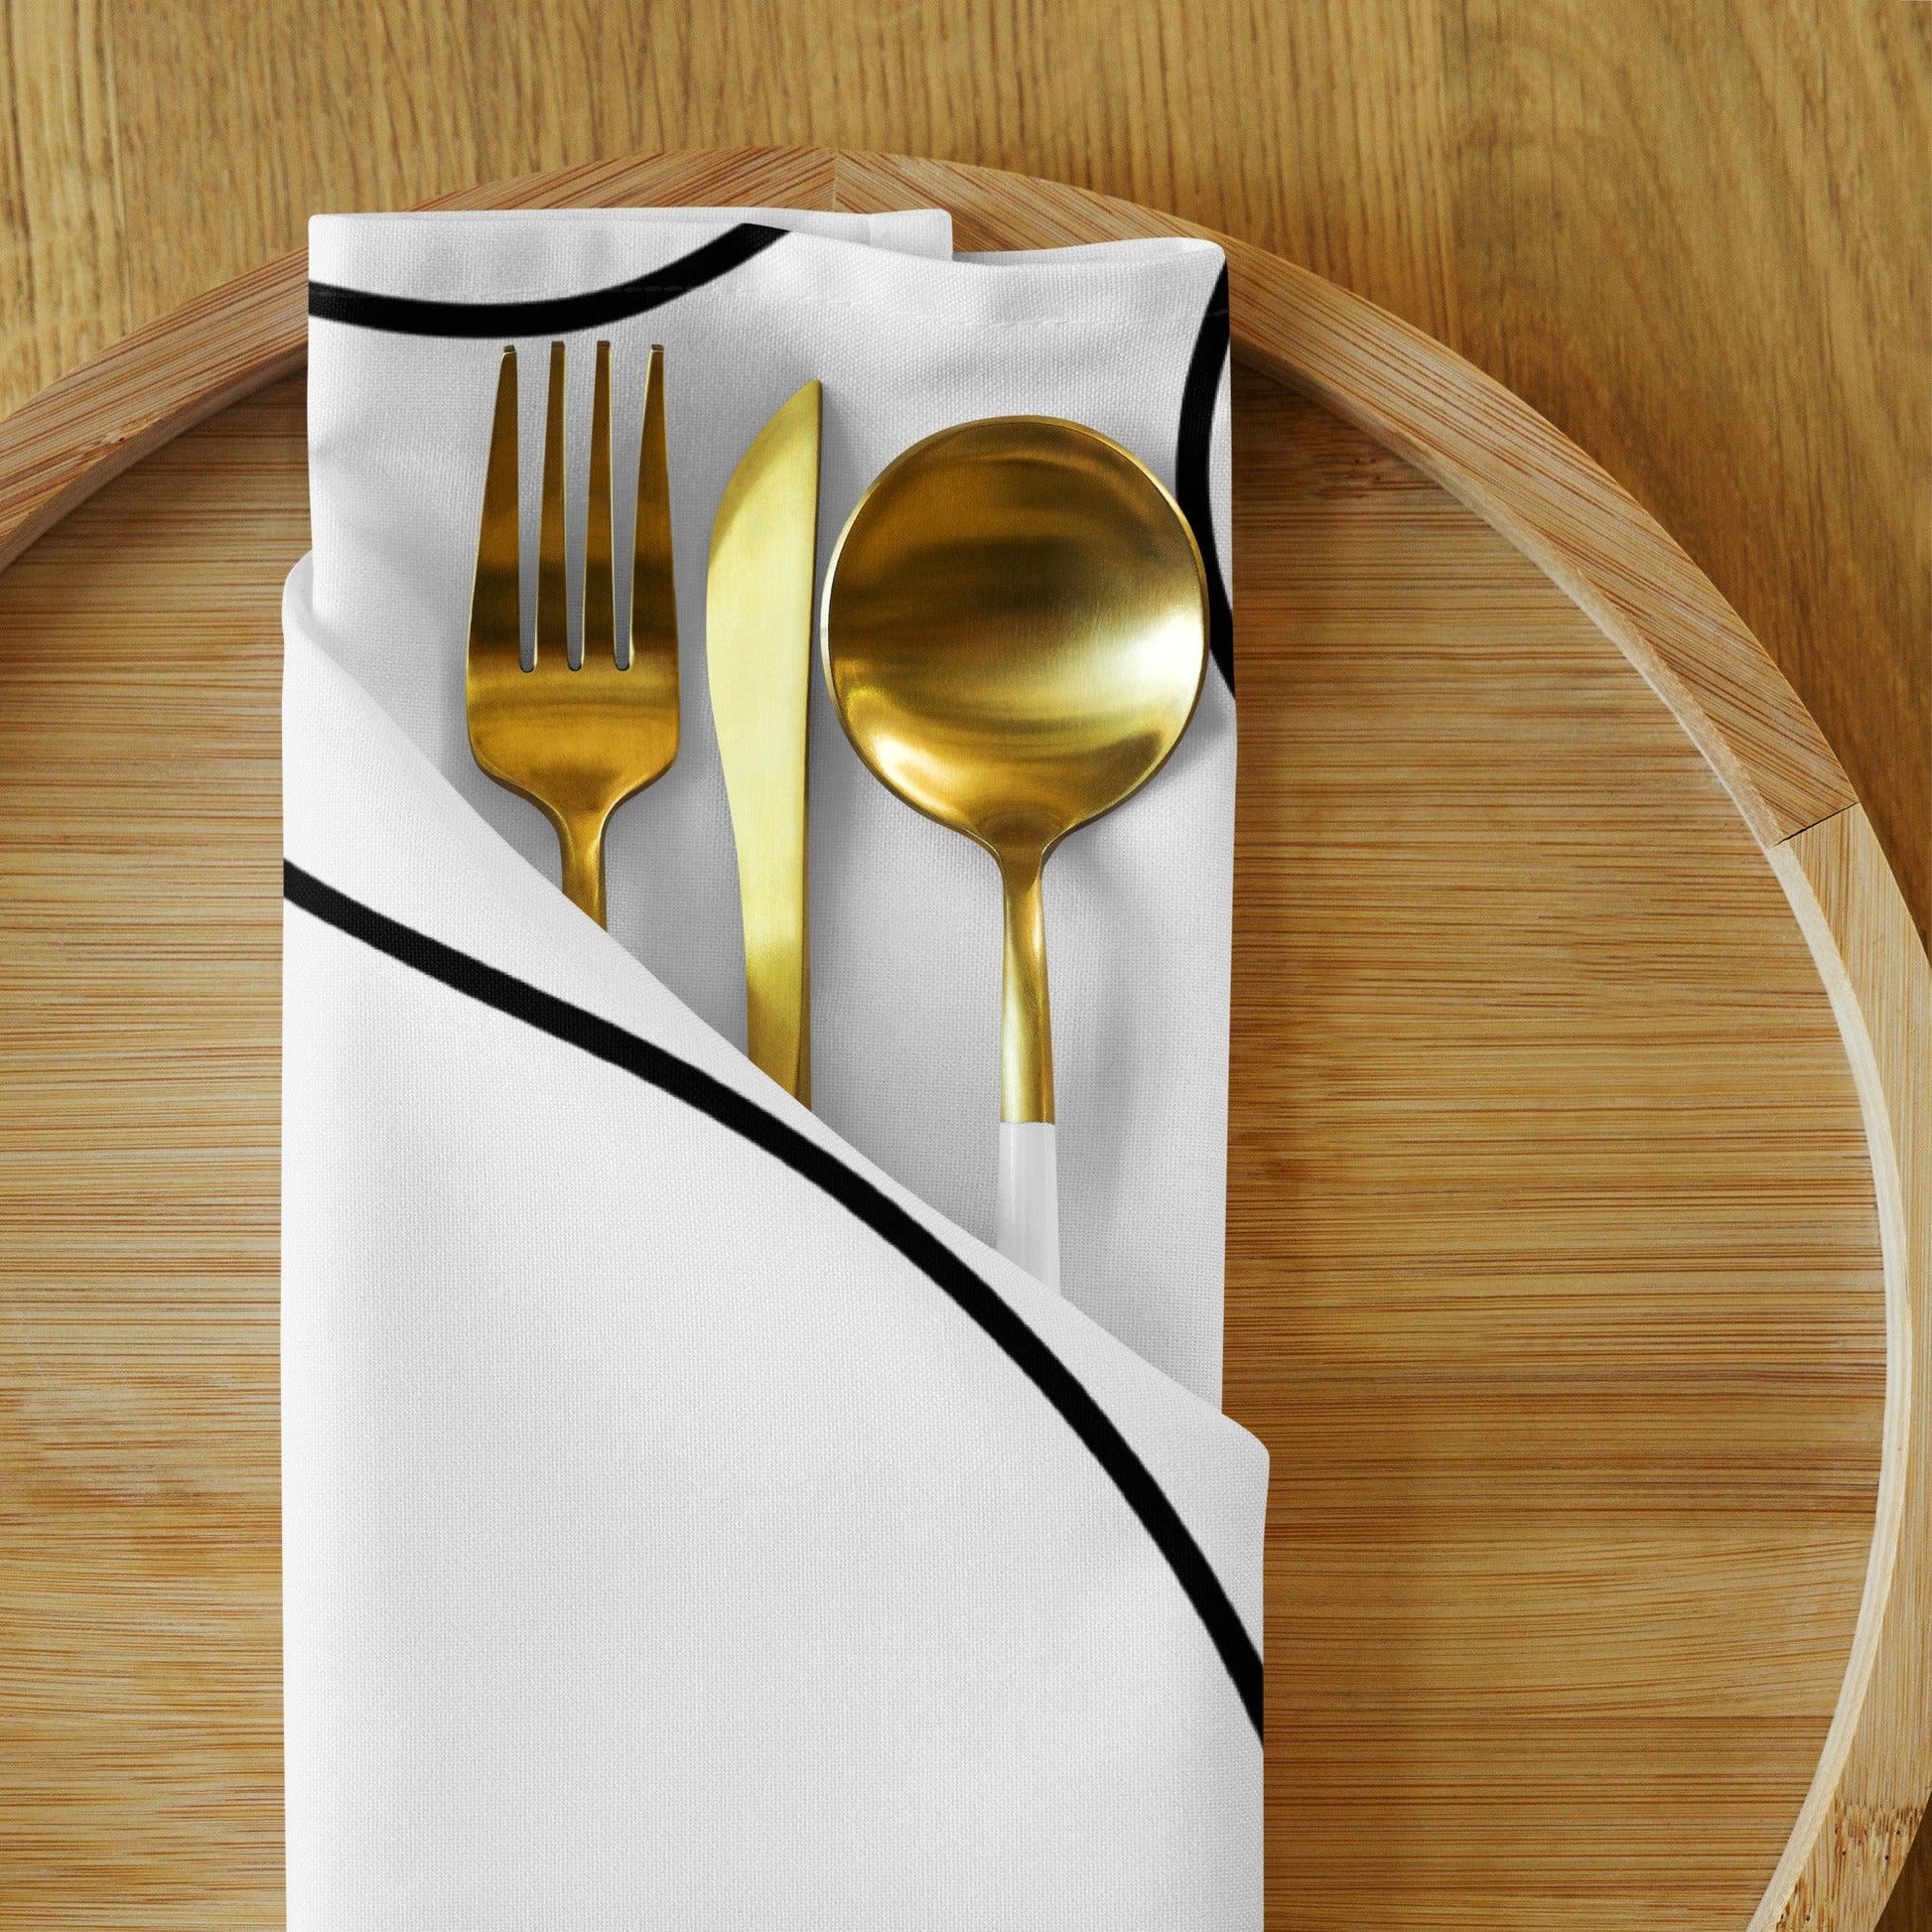 Monochrome Chic: White and Black Designed Cloth Napkin Set – A Timeless Addition to Your Dining Decor